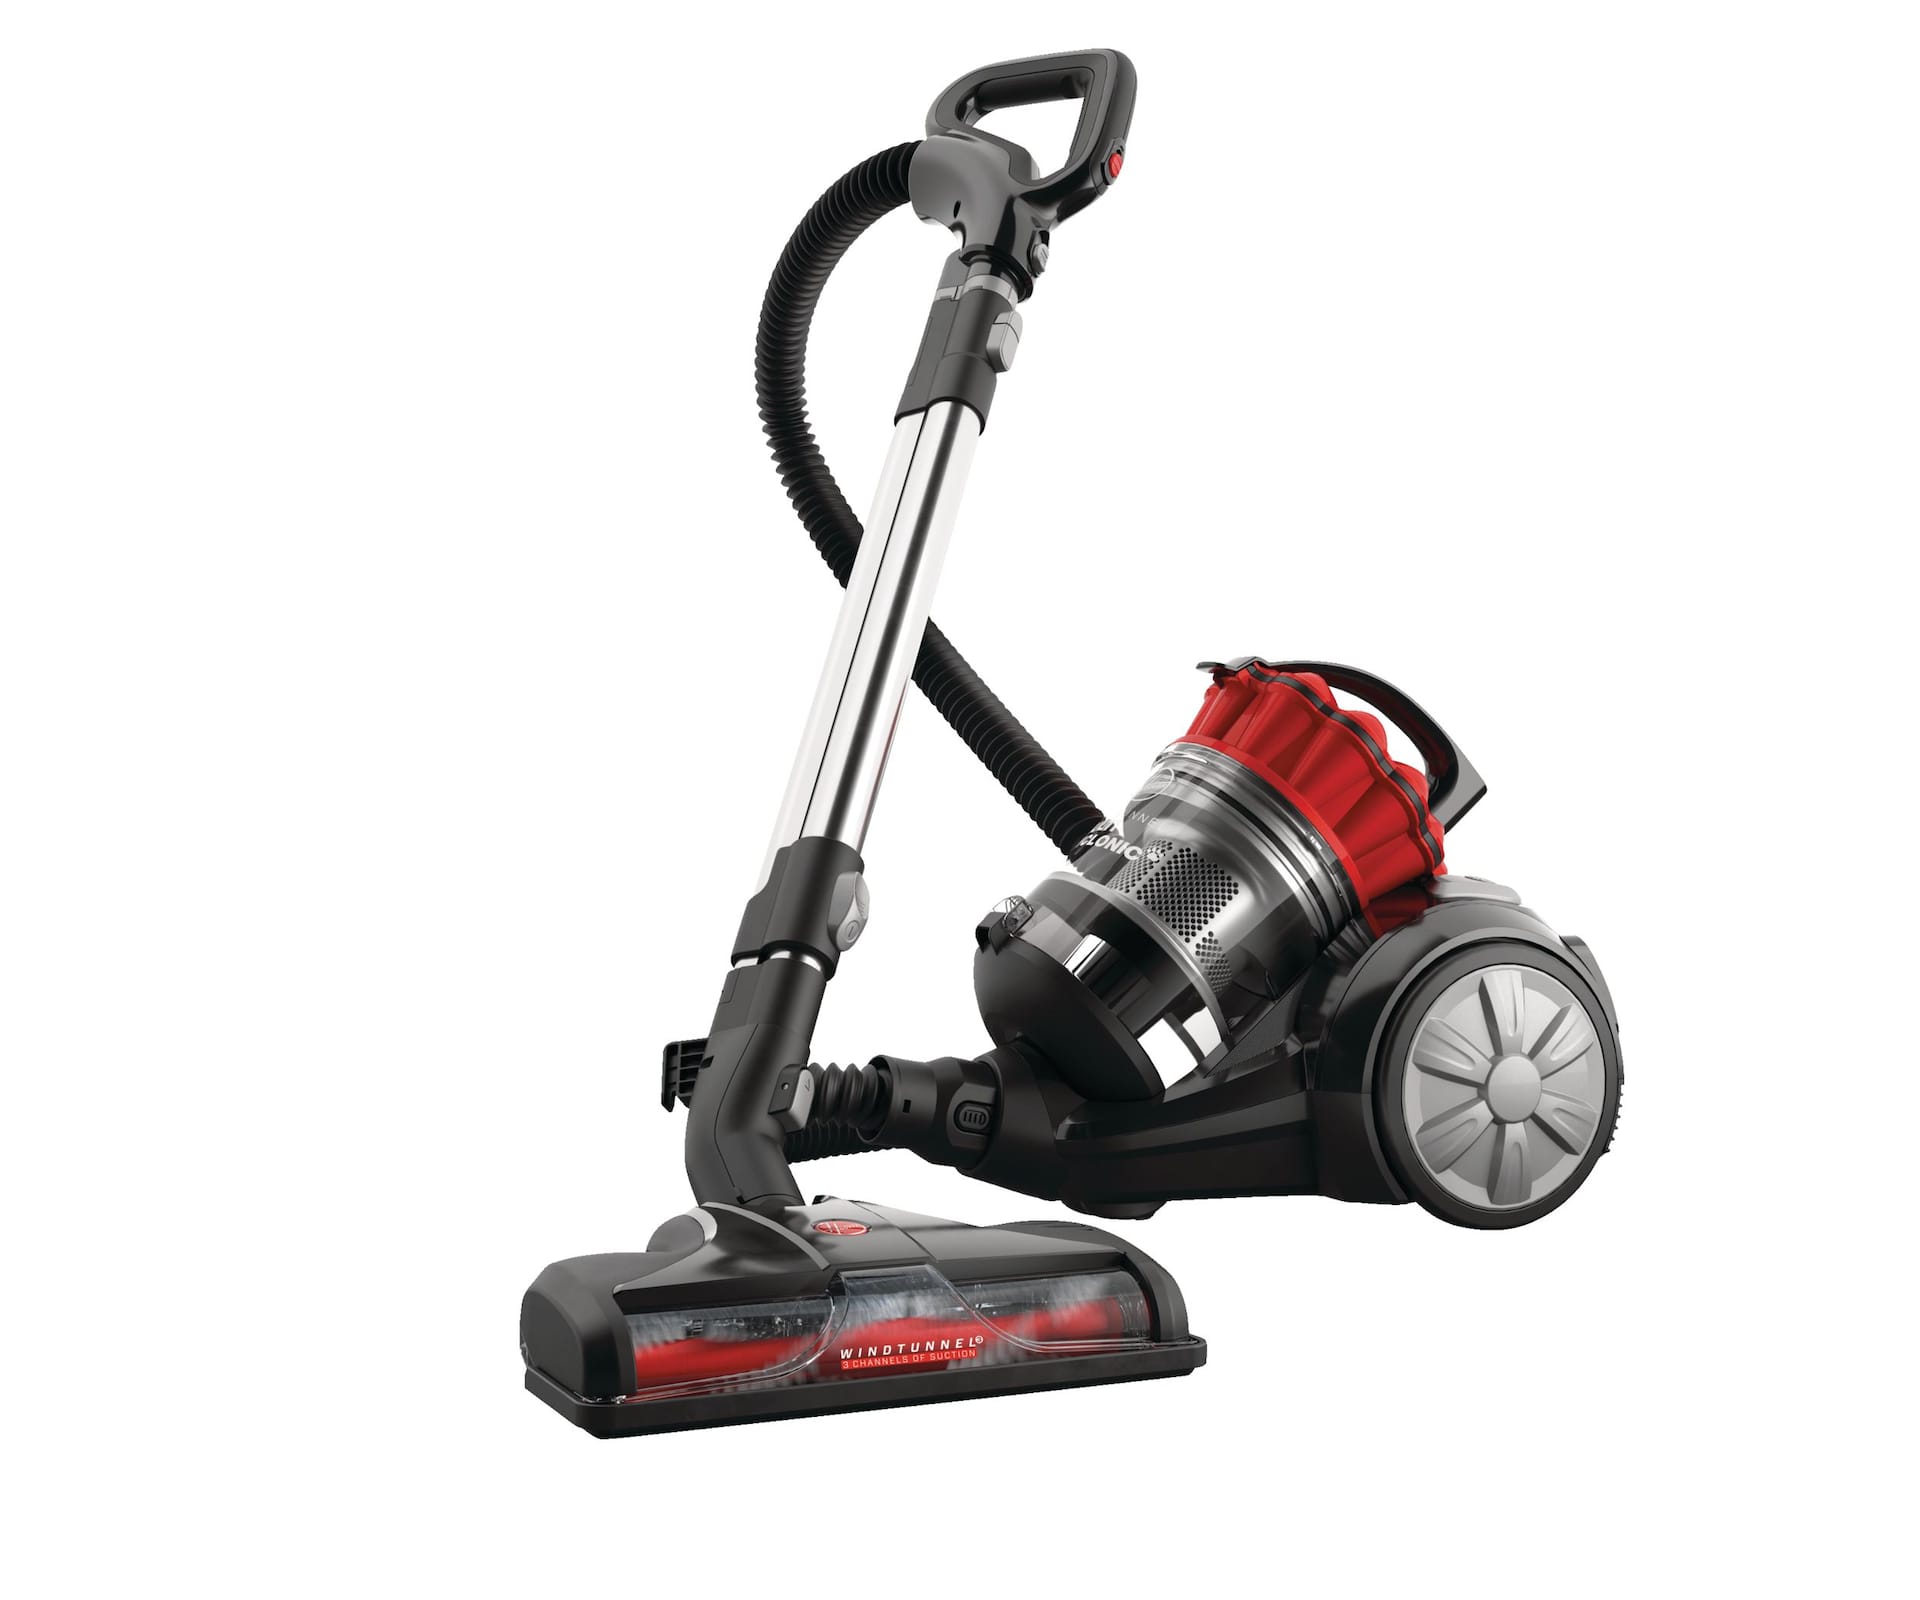 https://media-www.canadiantire.ca/product/living/cleaning/vacuums-and-floorcare/0437174/hoover-windtunnel-multi-cyclonic-bagless-canister-vacuum-c38dcee5-1718-4f2c-9d4e-434baac35125-jpgrendition.jpg